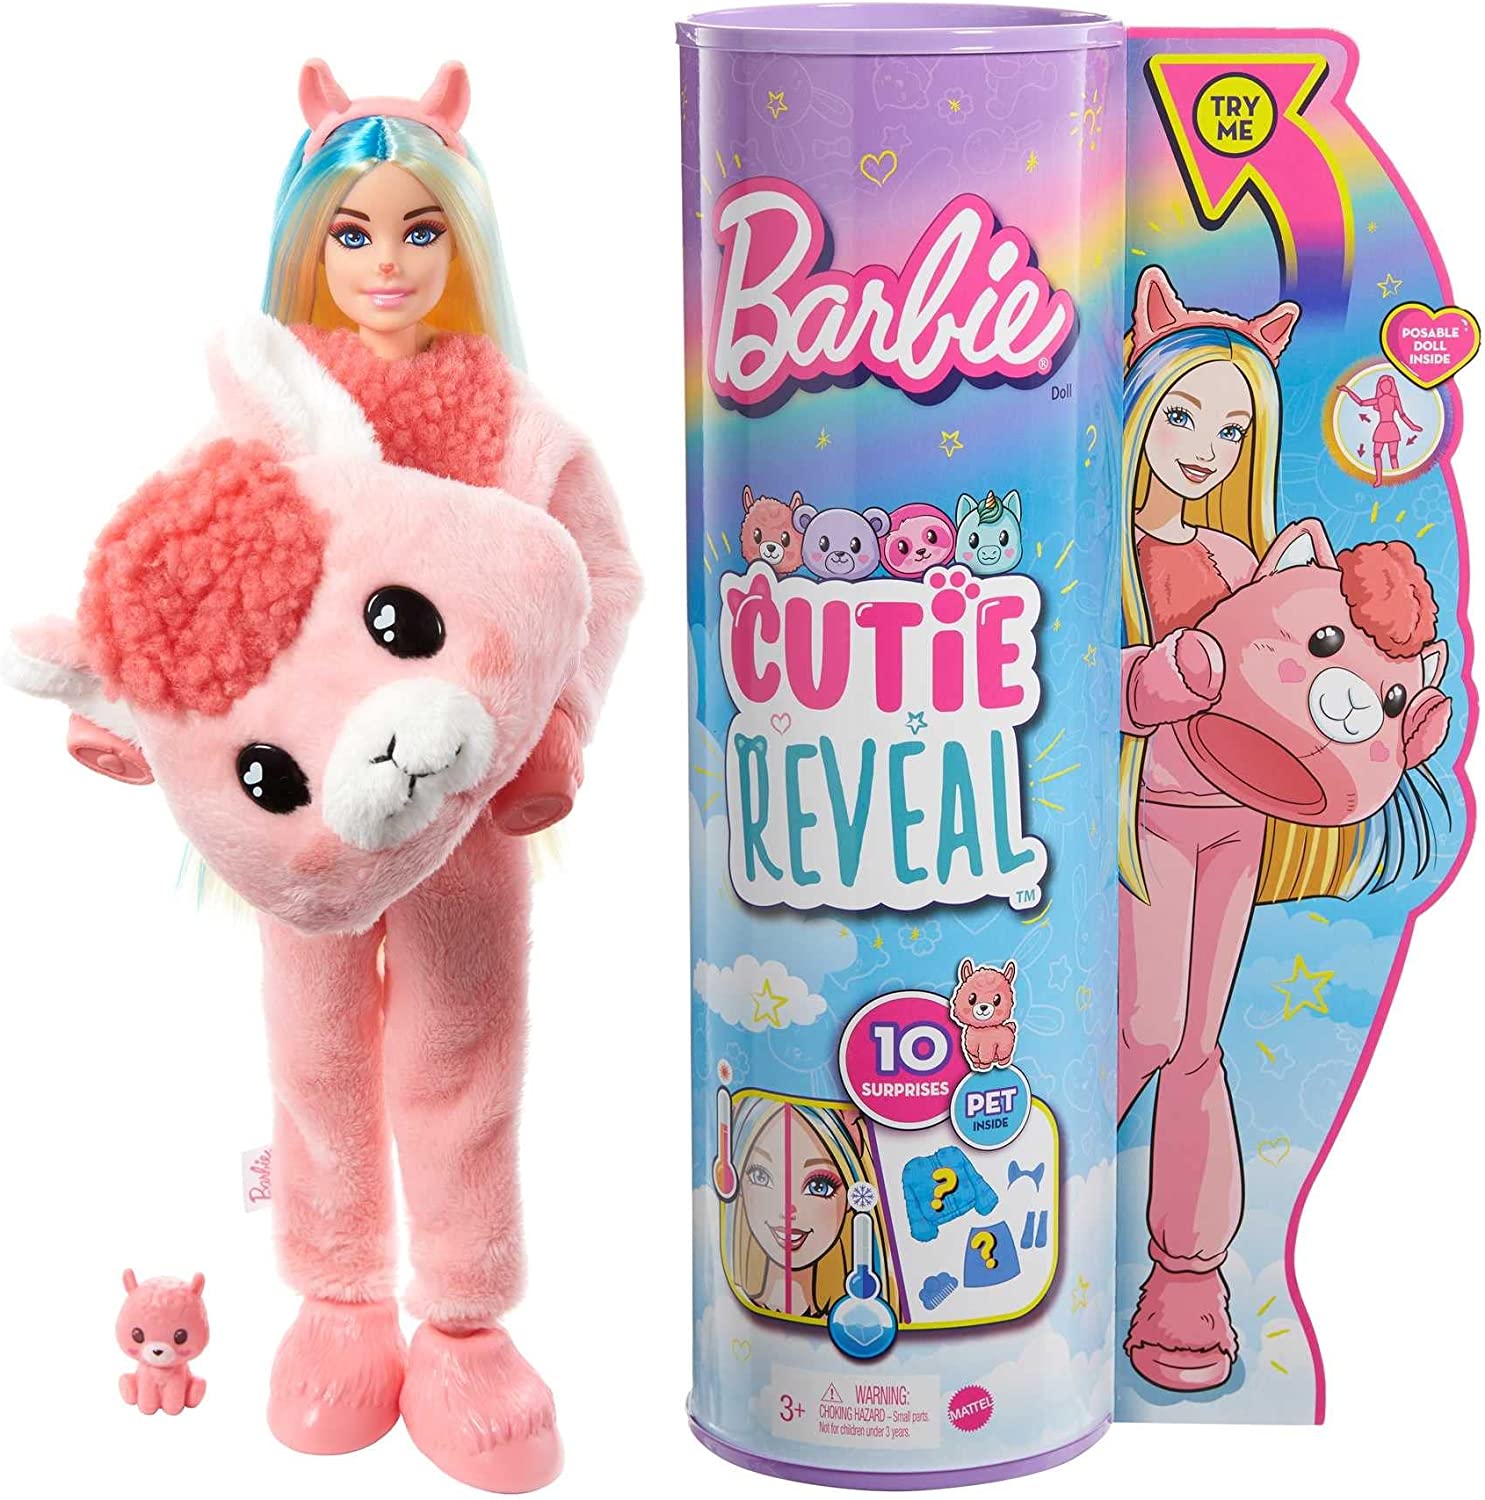 Barbie Doll Cutie Reveal Llama Fantasy Series Doll with 10 Surprises Pet, Color Change and Accessories Toys and Gifts for Kids